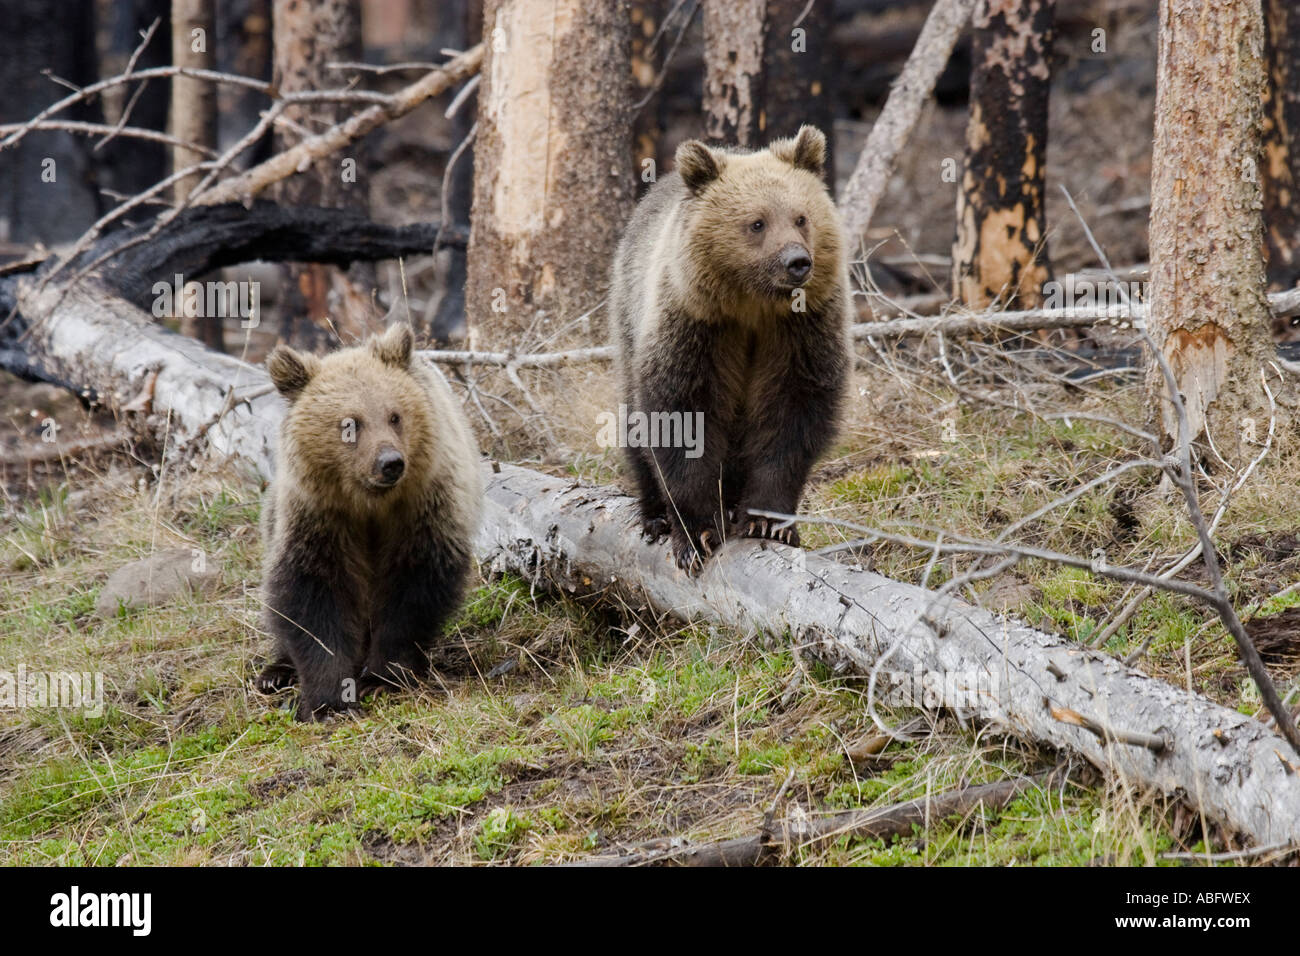 Grizzly bear cubs, Yellowstone National Park, Wyoming Stock Photo